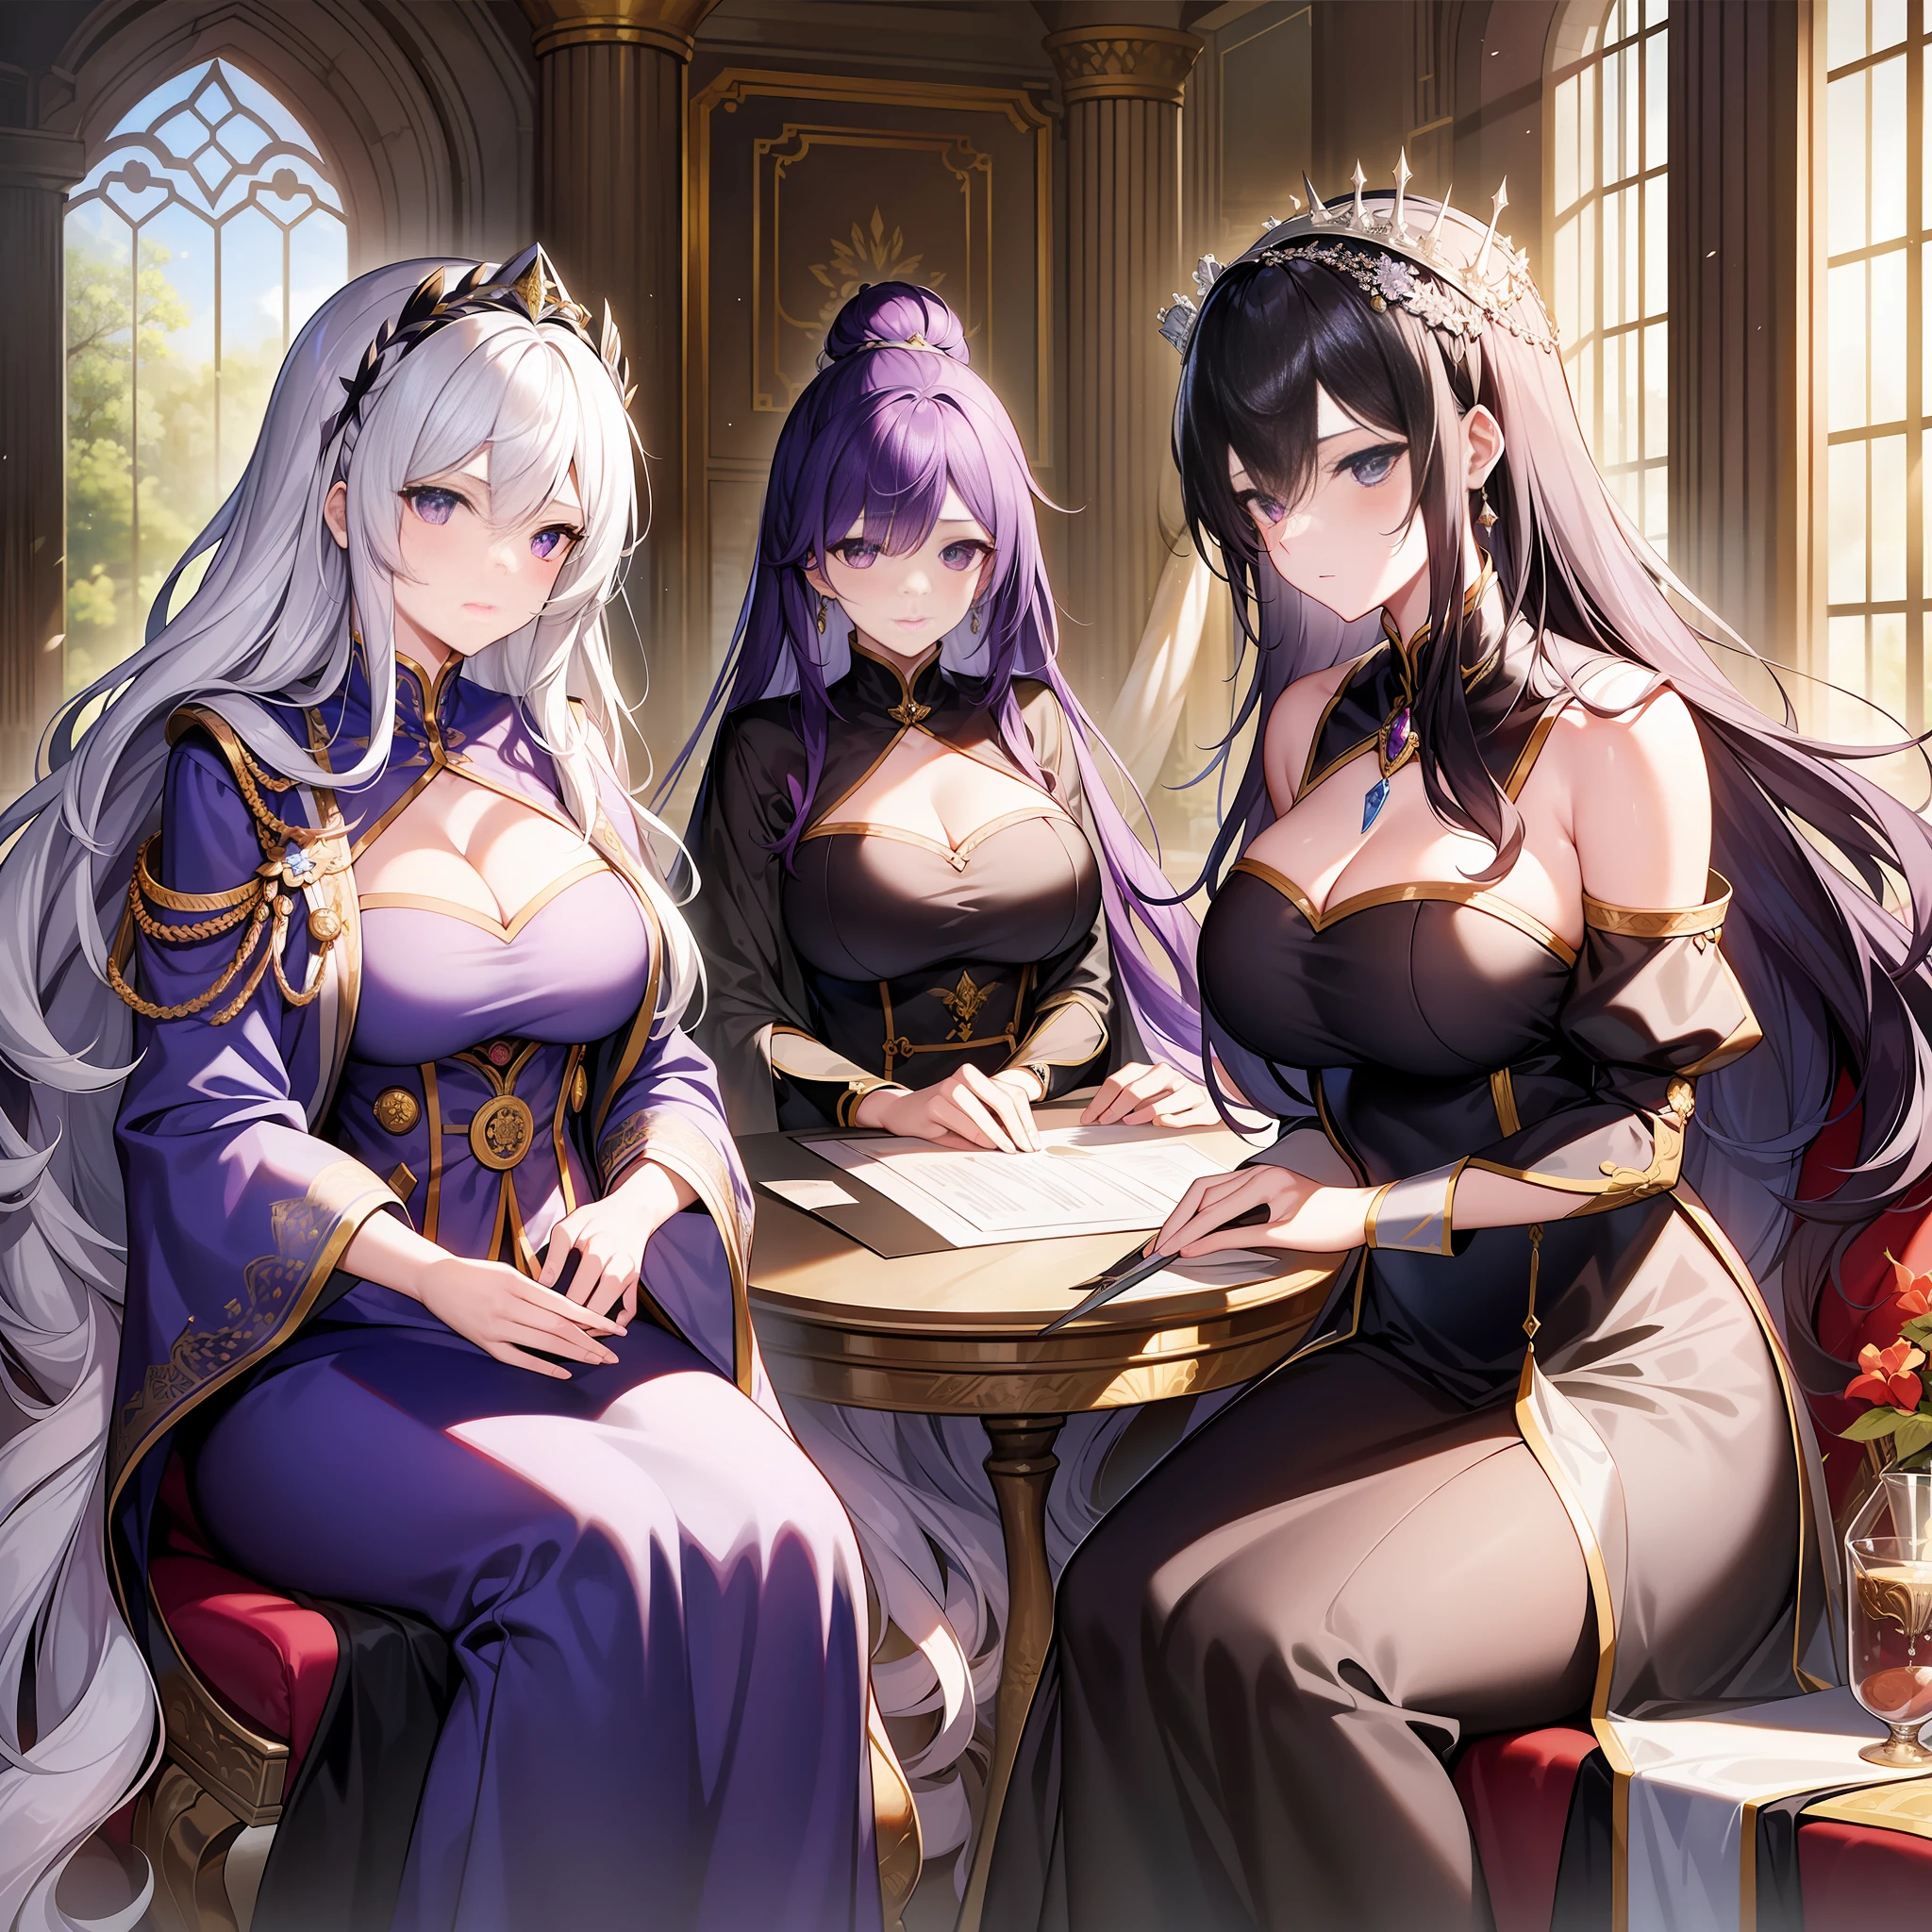 In a tall castle, three female emperors sat at a long table, talking about government affairs. Among them, the black-haired female emperor wore a black robe and a golden crown on her head, she had a serious face and held a quill in her hand; The white-haired female emperor wore a white dress, a silver silk scarf, a white bow hair ornament on her head, her expression was kind, and she held a document in her hand; The purple-haired female emperor wore a purple long dress, a pair of silver high heels, and a purple garland on her head, her eyes were deep, and she held a thick scroll in her hand. Outside the huge glass windows inside the castle is a beautiful garden scene, through which sunlight spills into the hall, making the whole scene noble and gorgeous.